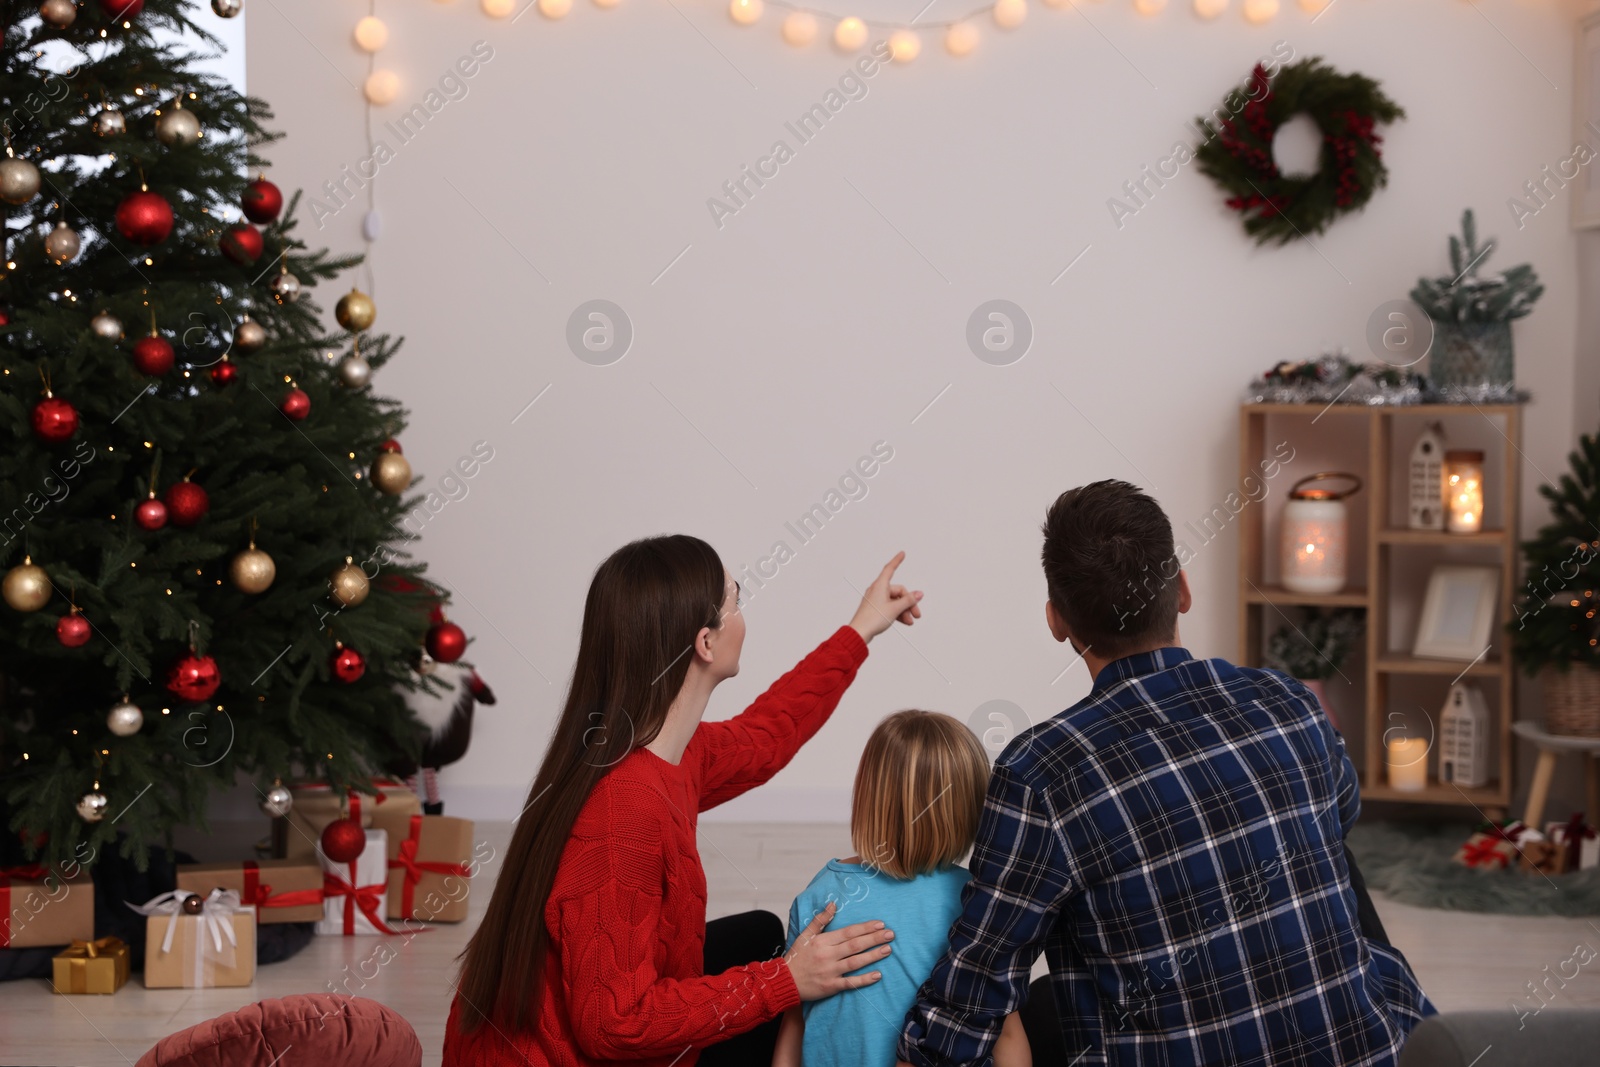 Photo of Family watching Christmas movie via projector in cosy room, back view. Winter holidays atmosphere